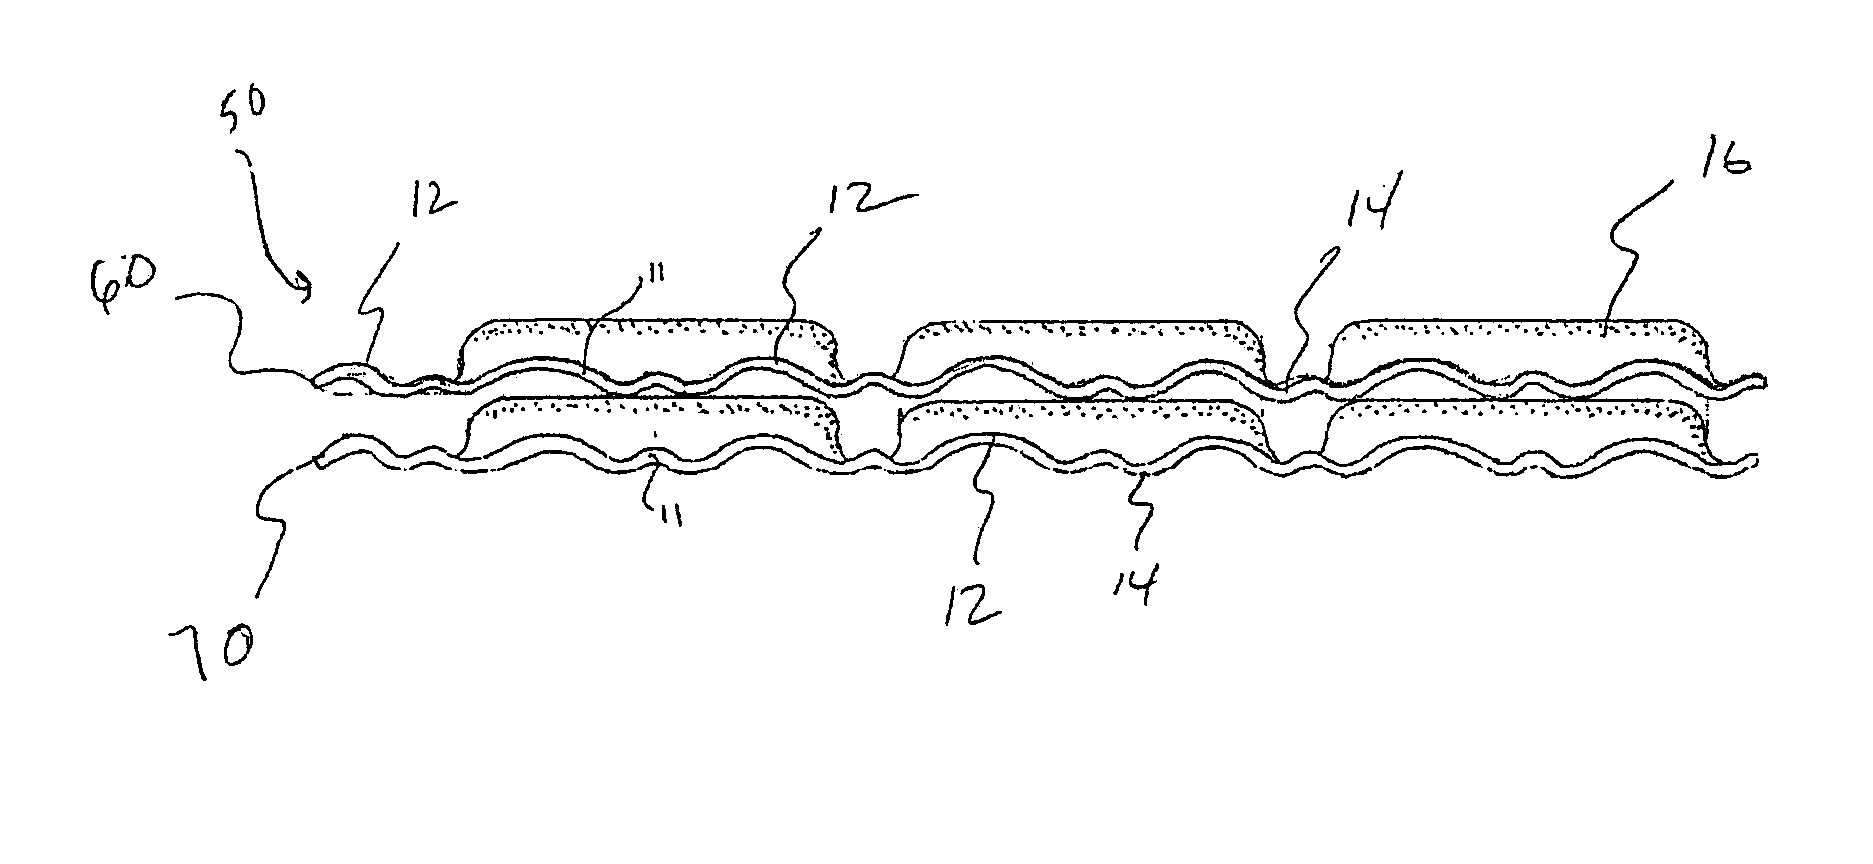 Method for reducing nesting in paper products and paper products formed therefrom